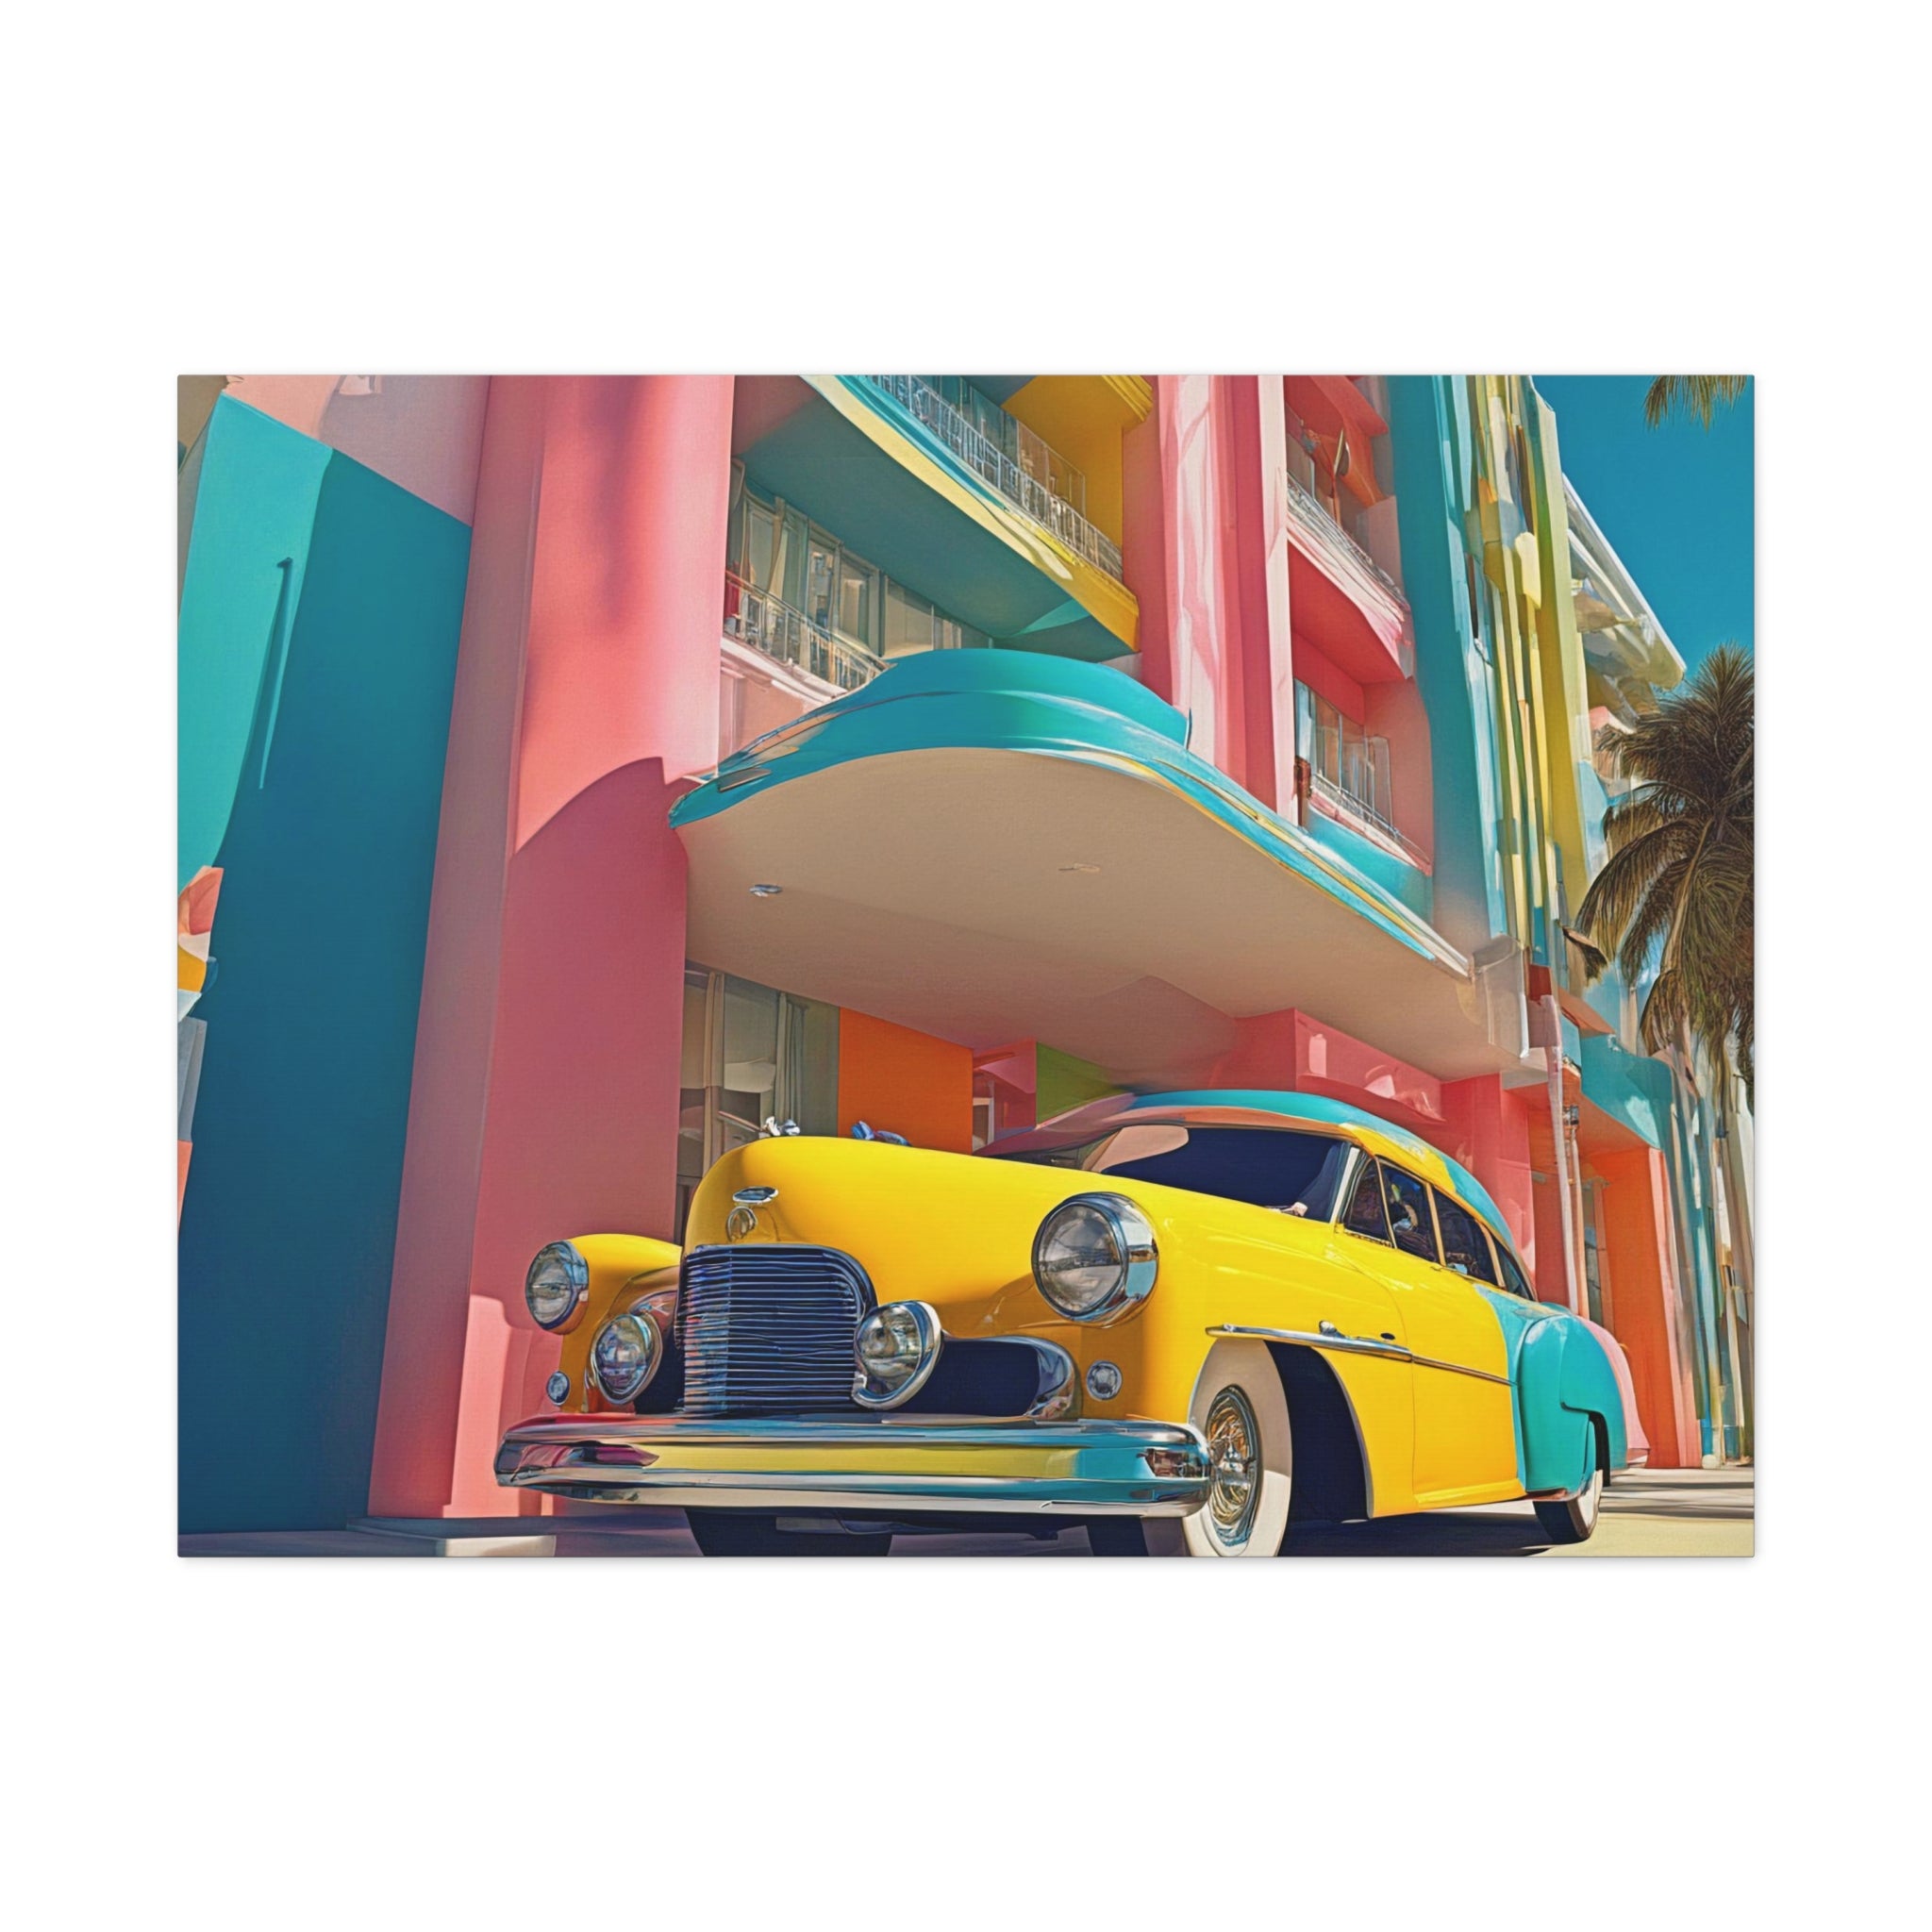 Wall Art MY NEW CAR Art Deco Canvas Print Painting Original Giclee 40X30 GW Love Nice Beauty Fun Design Fit Hot House Home Office Gift Ready Hang